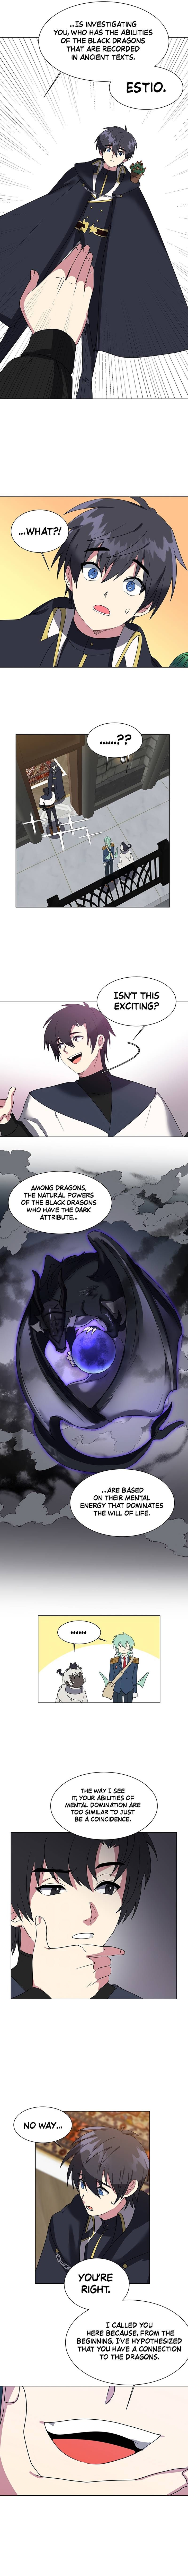 Estio Chapter 41 Page 7